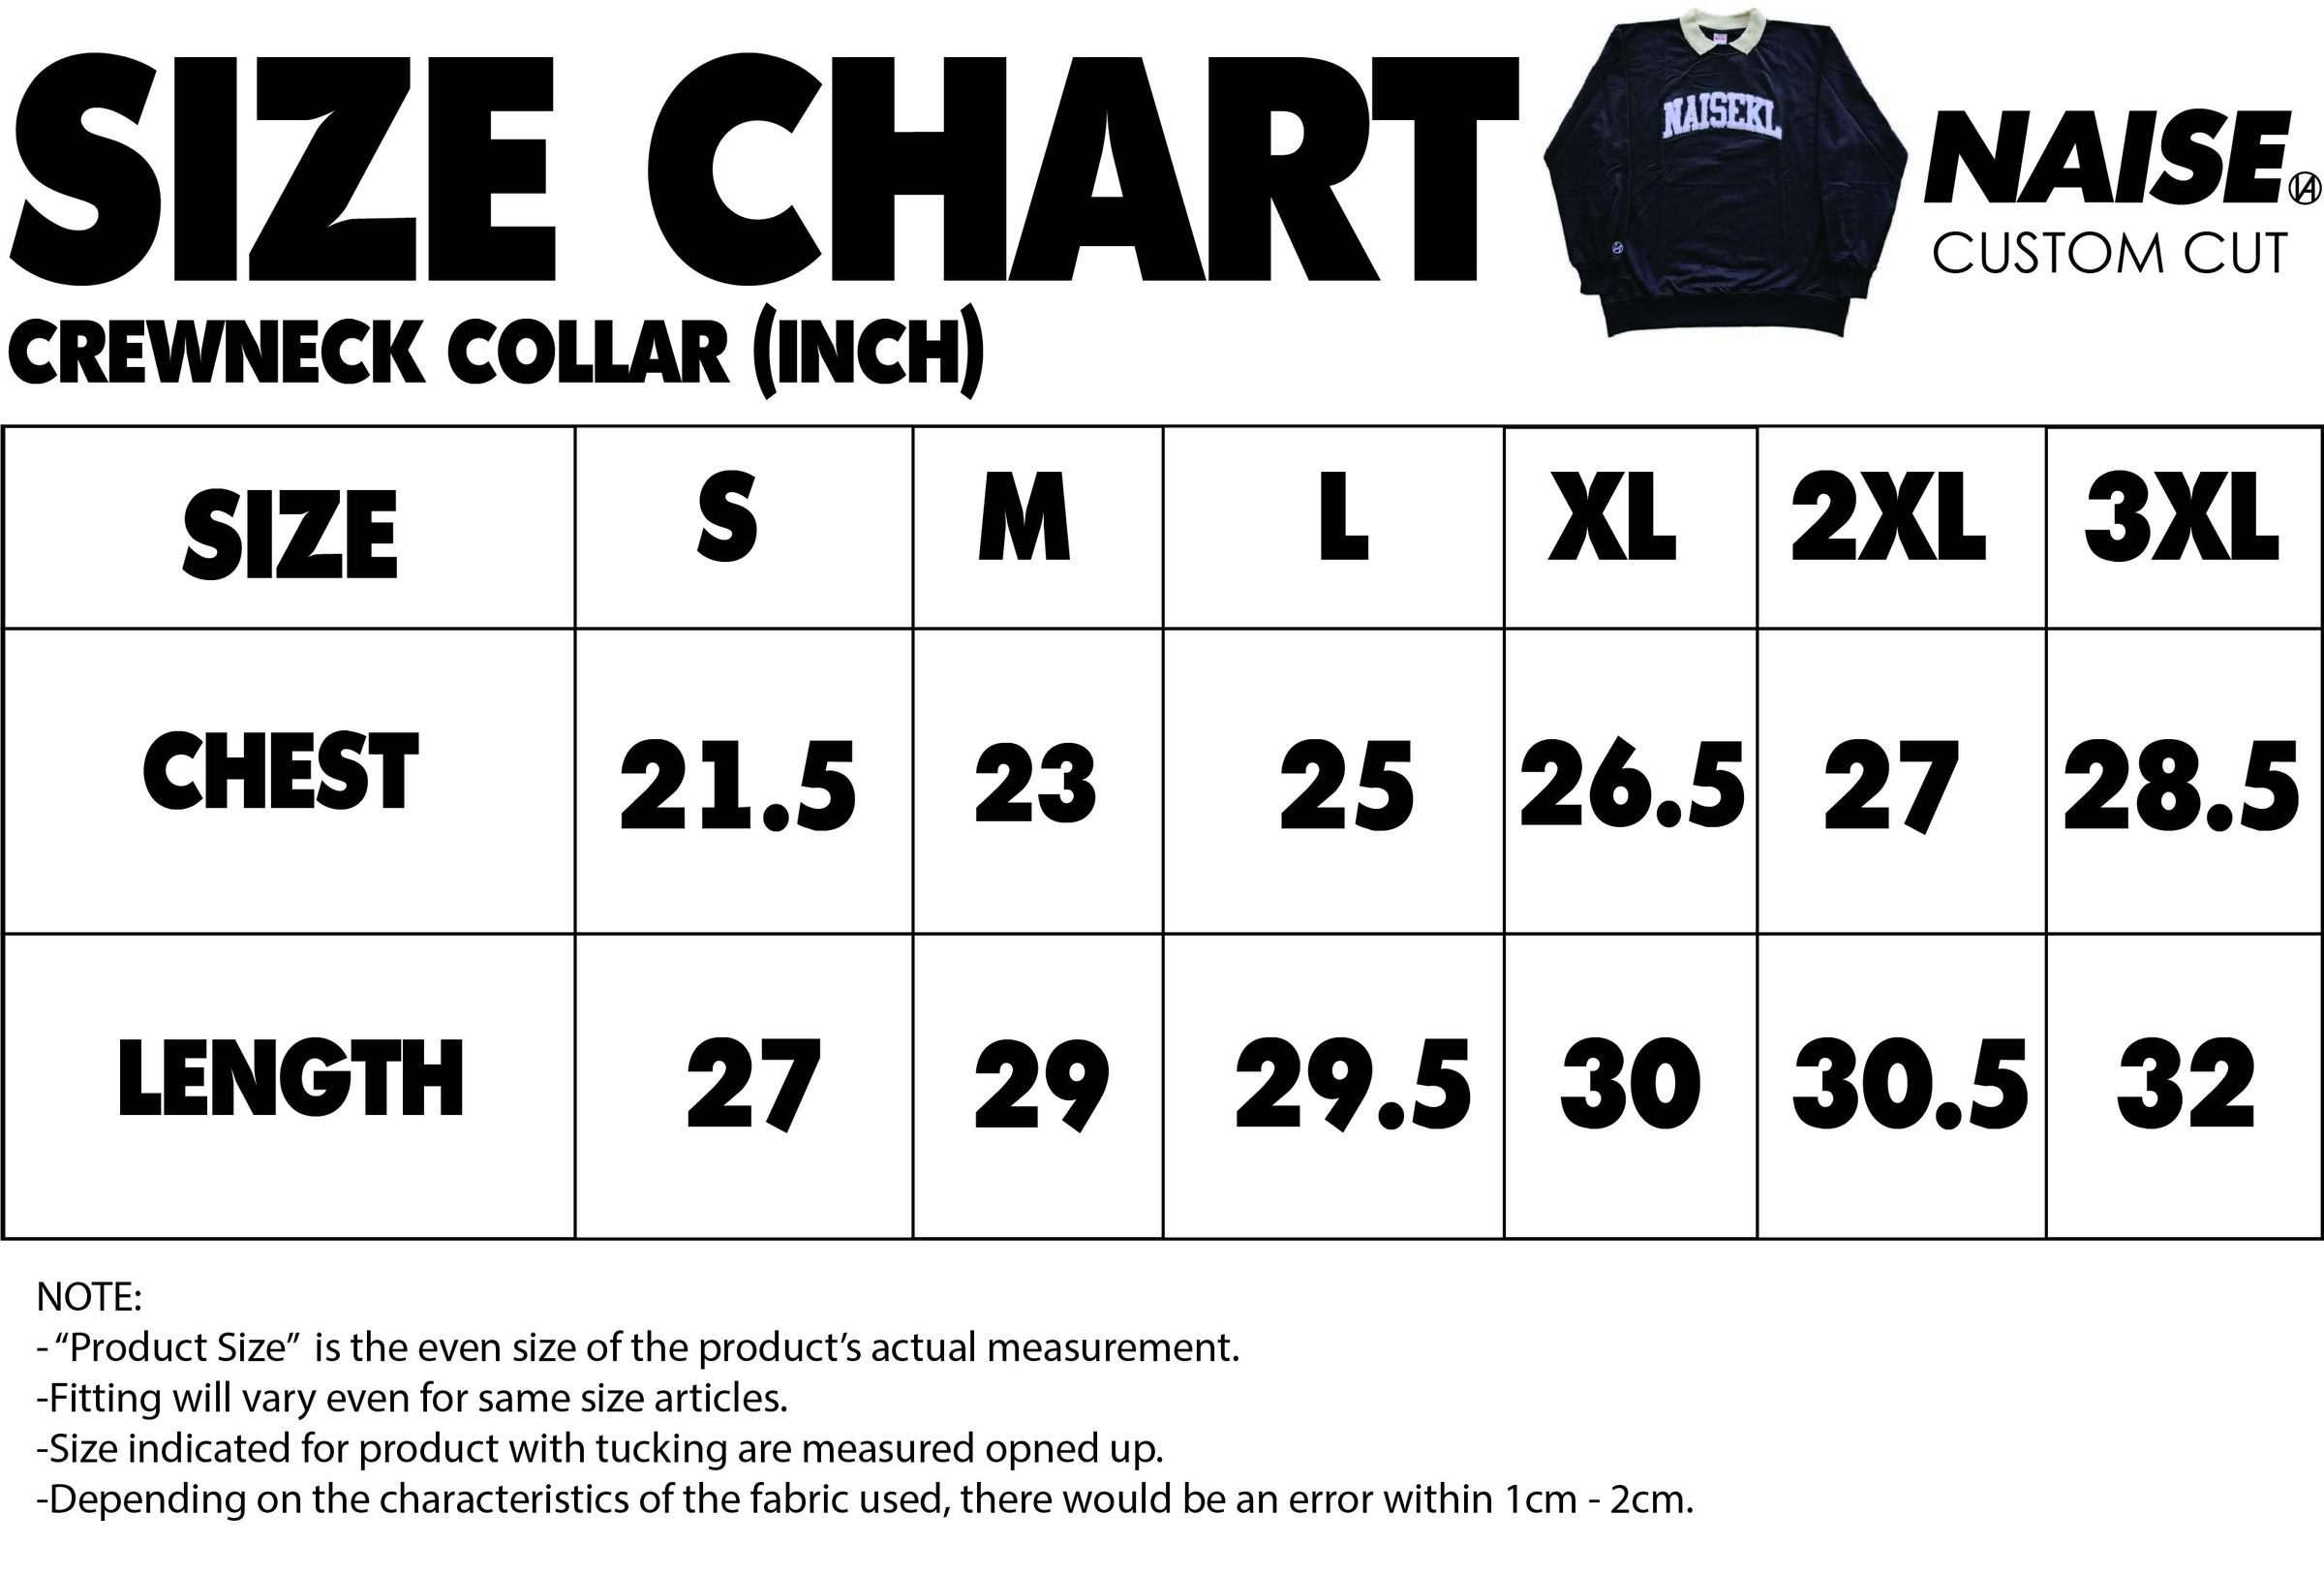 SIZE CHART CREWNECK COLLAR MUQRIE 2023 NOTE INCLUDED